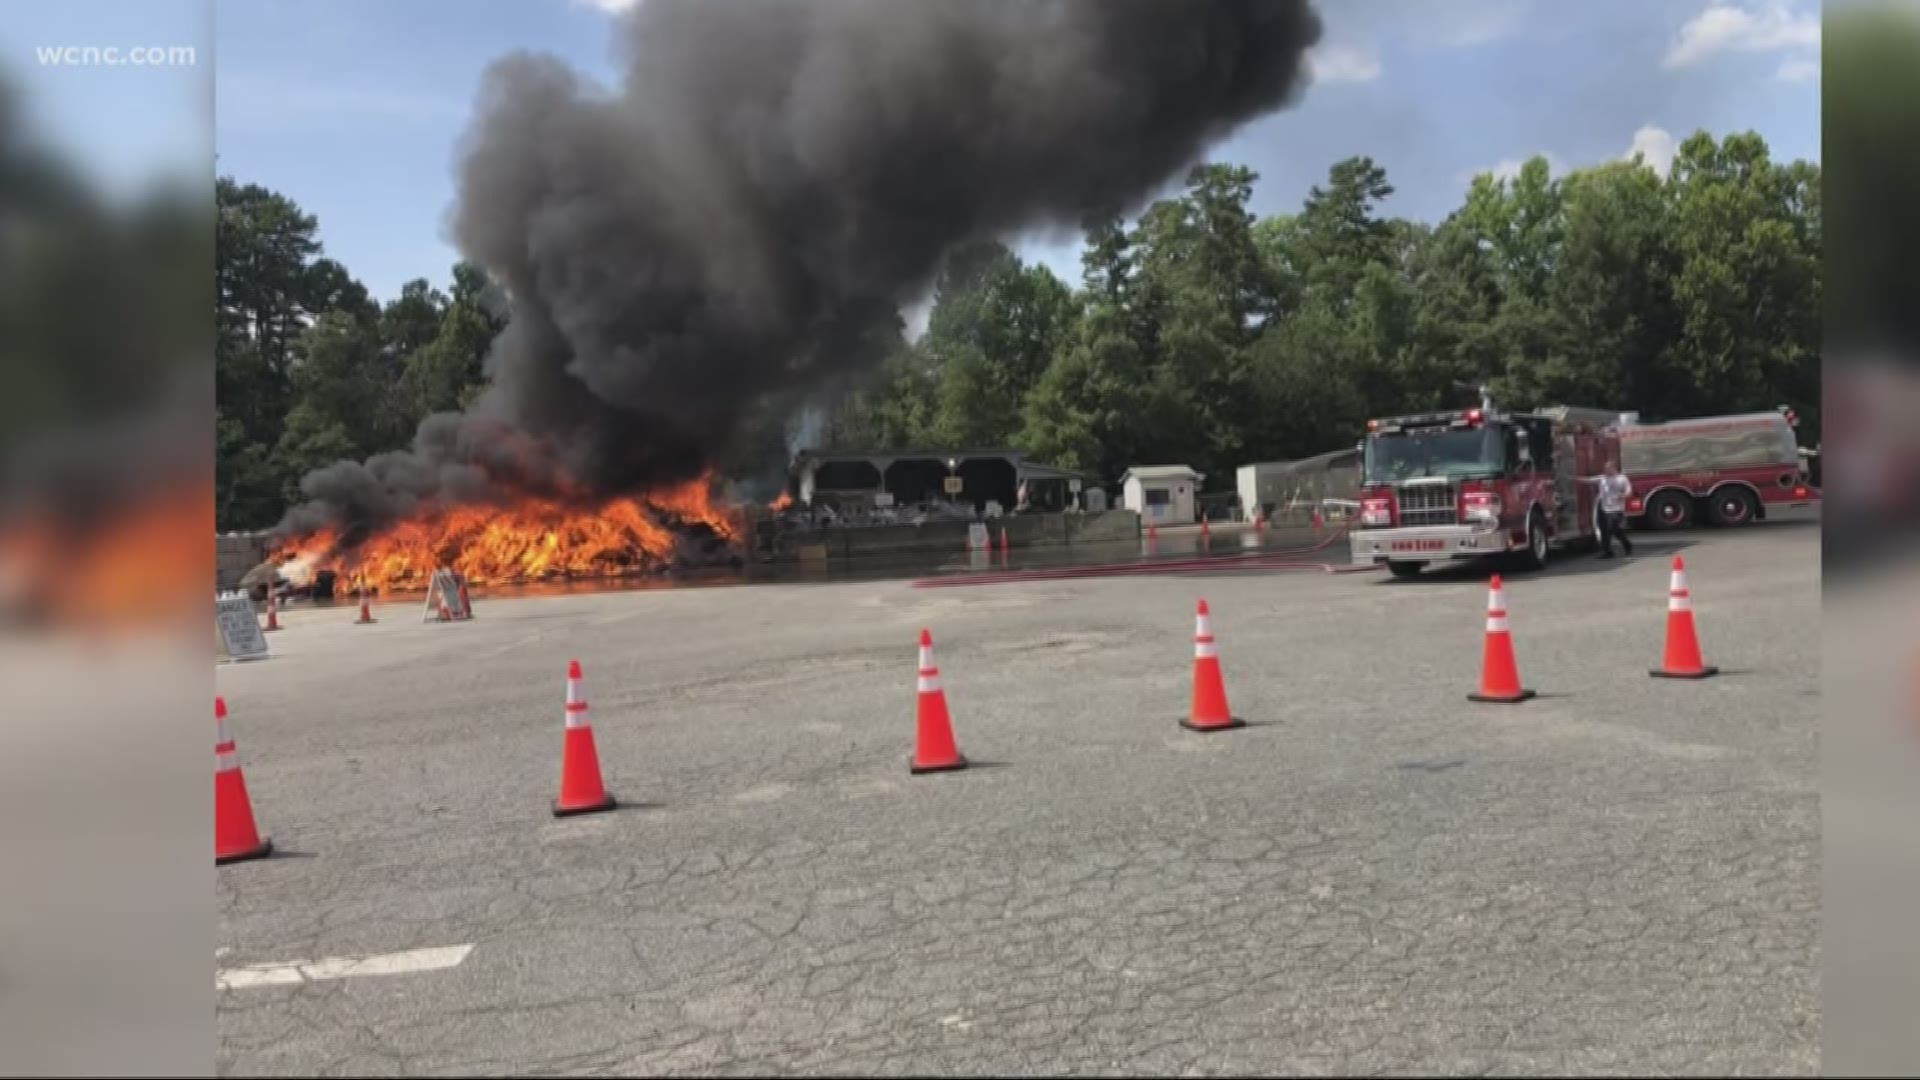 Sunday afternoon, big flames and a large plume of smoke were visible in Huntersville. The Huntersville Fire Department has not released any information on the cause at this time.